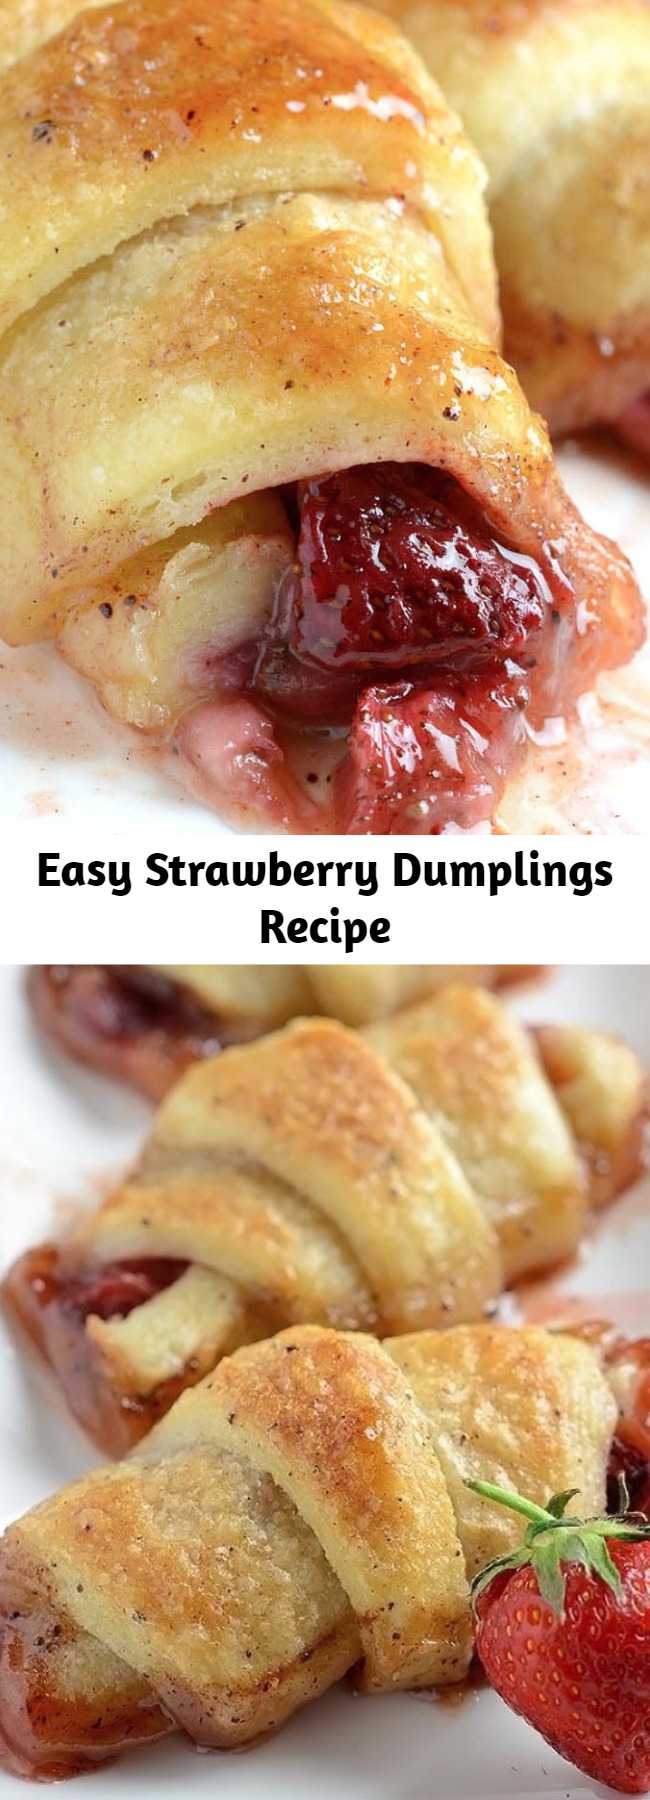 Easy Strawberry Dumplings Recipe - These Strawberry Dumplings served with a scoop of vanilla ice cream are perfect for spring and summer. Crescent rolls filled with strawberries and baked in butter & brown sugar sauce. They’re the perfect balance between soft and crispy!